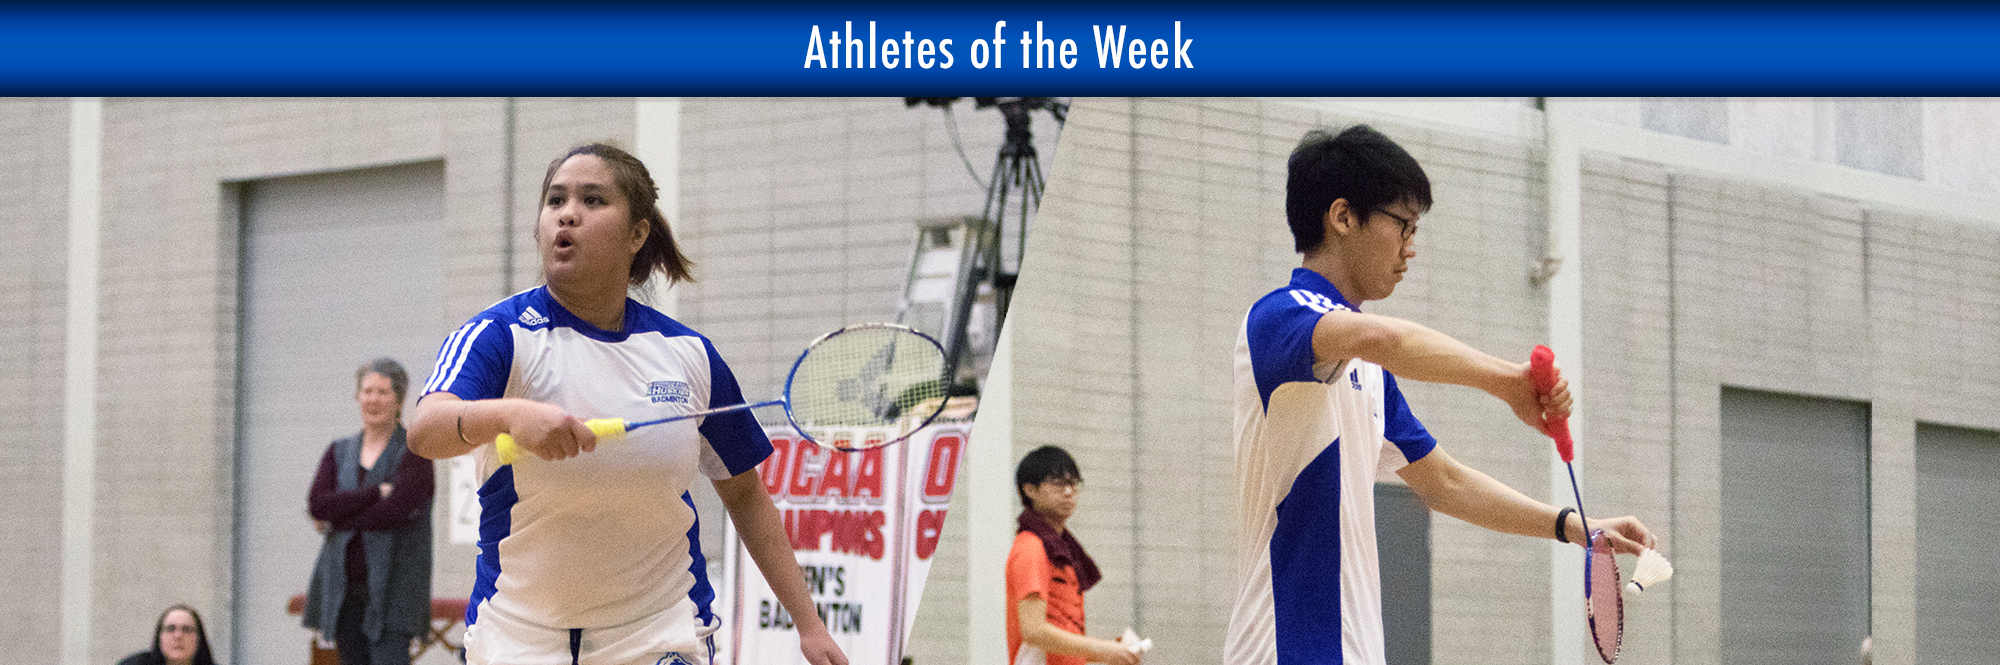 ANGELINE ALVIAR, MIKE RA NAMED HUSKIES ATHLETES OF THE WEEK AFTER TEAMING UP FOR PROVINCIAL GOLD